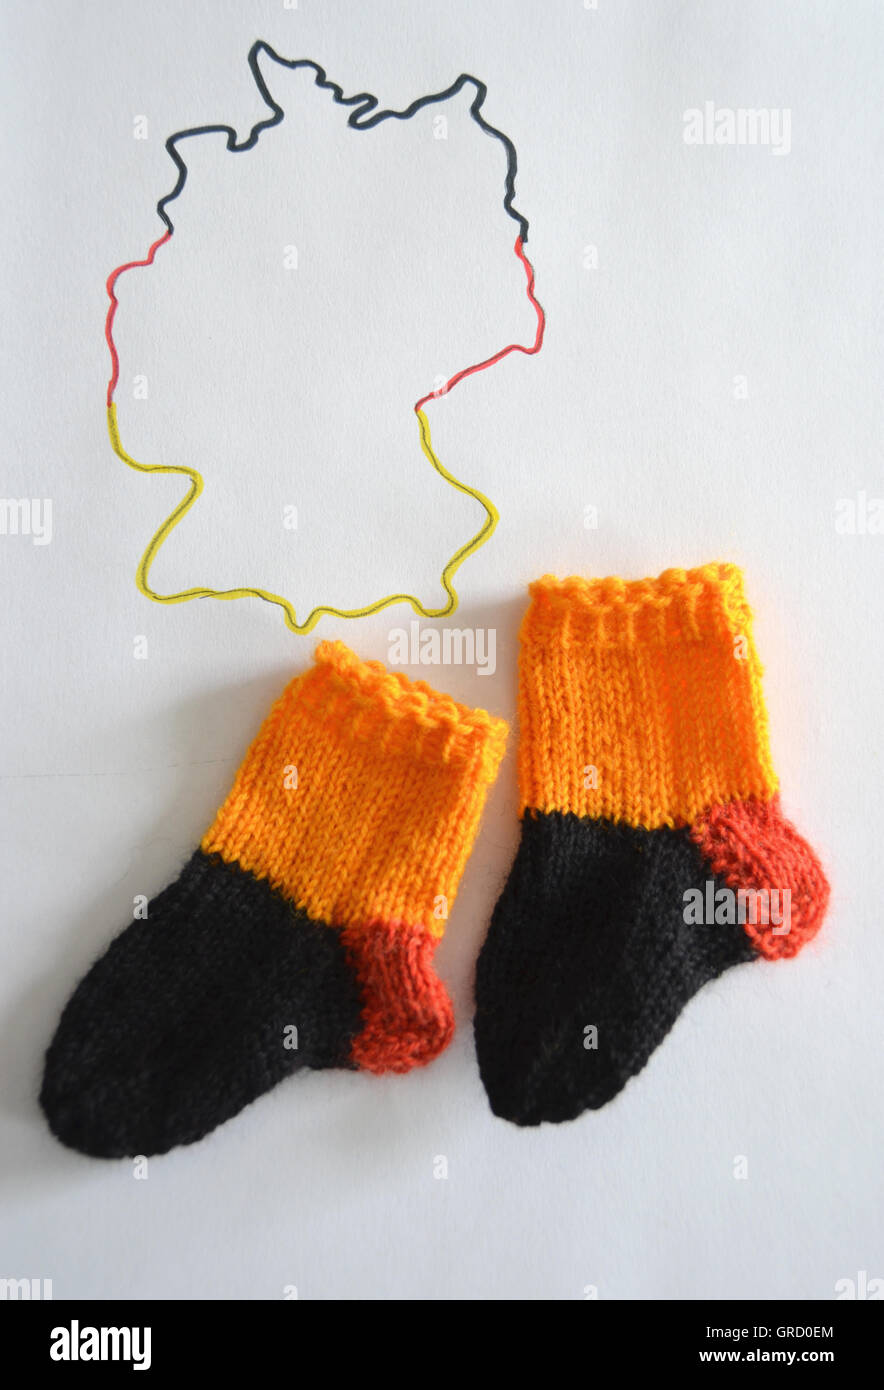 Handmade Woolen Socks In The Colours Of Germany Stock Photo - Alamy